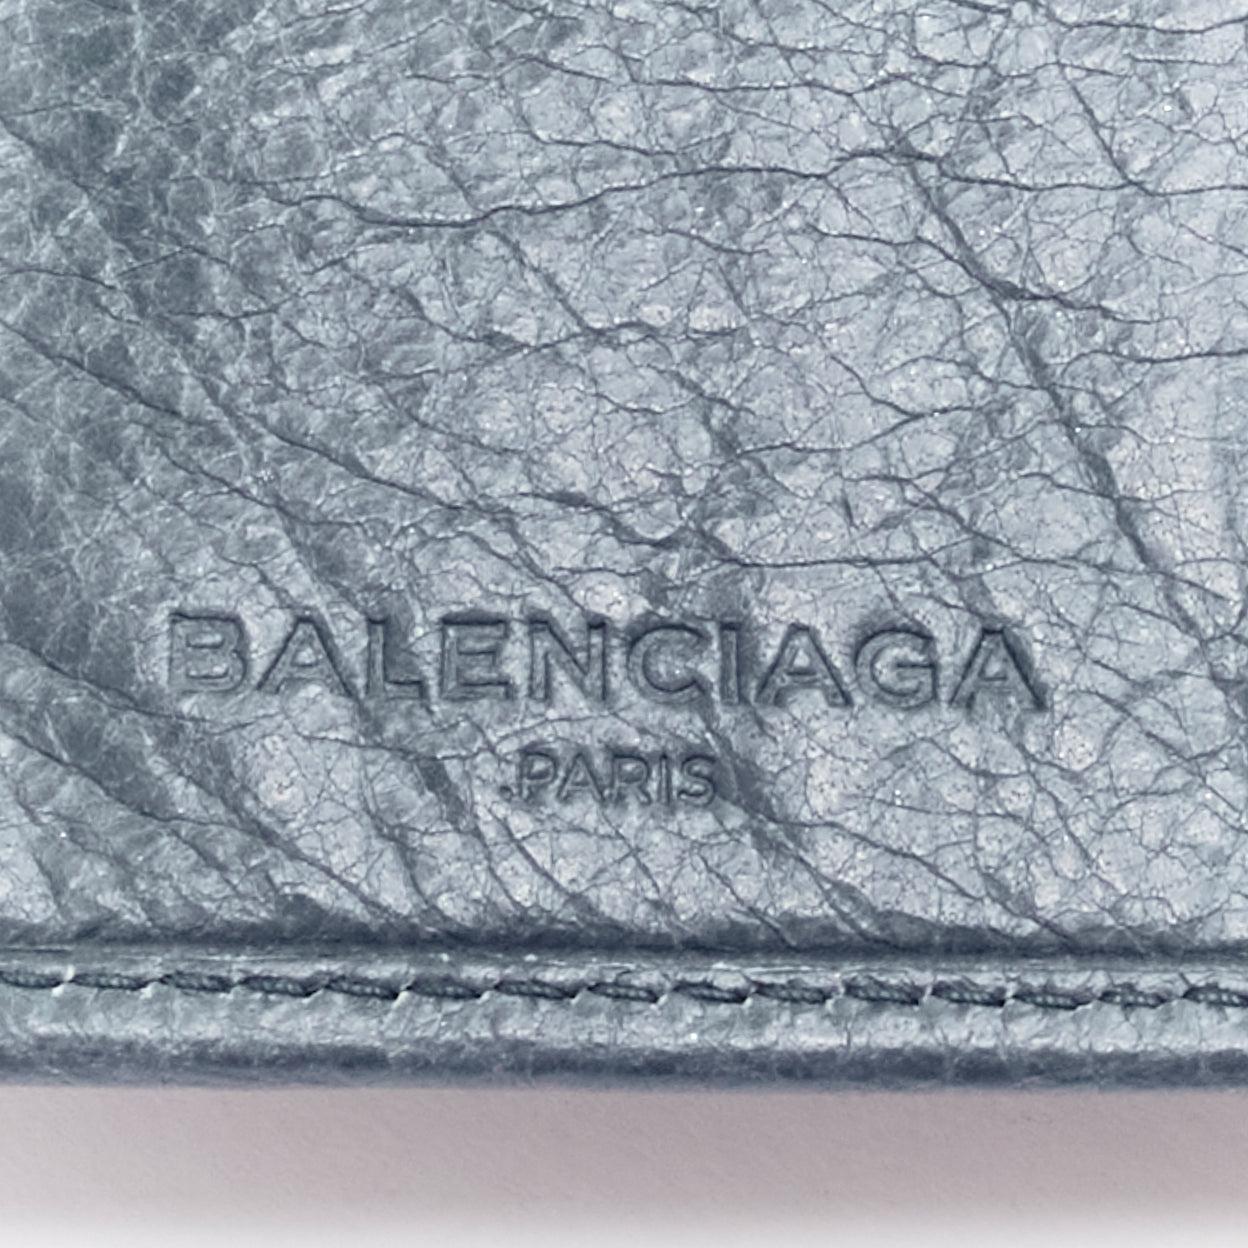 BALENCIAGA blue leather motorcycle long wallet on chain cluch bag For Sale 7